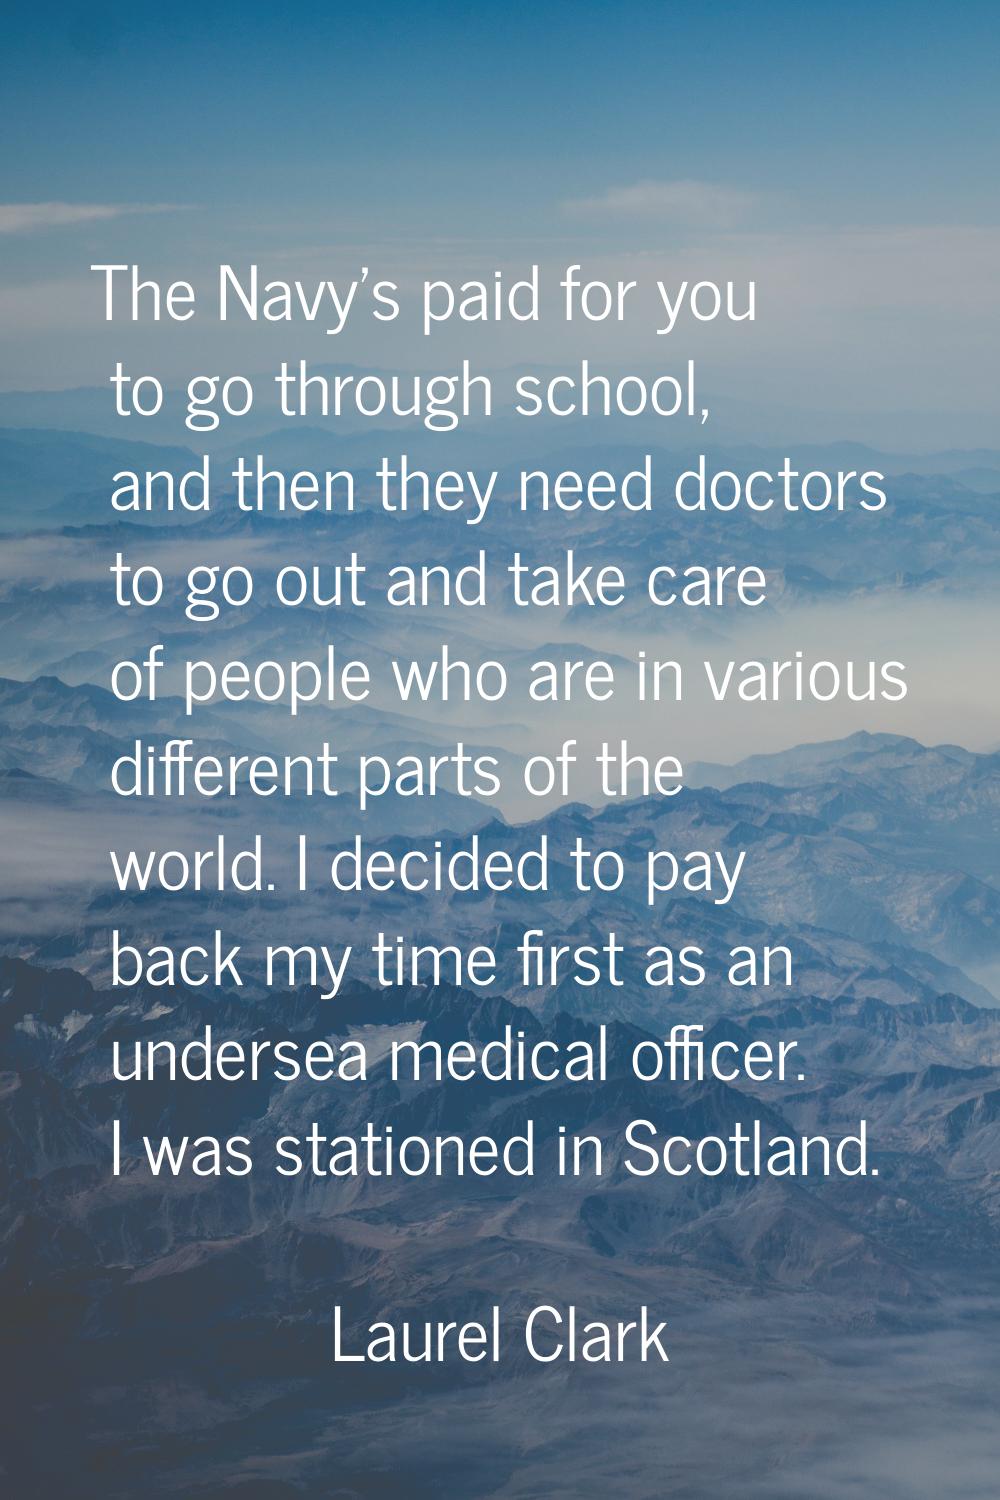 The Navy's paid for you to go through school, and then they need doctors to go out and take care of